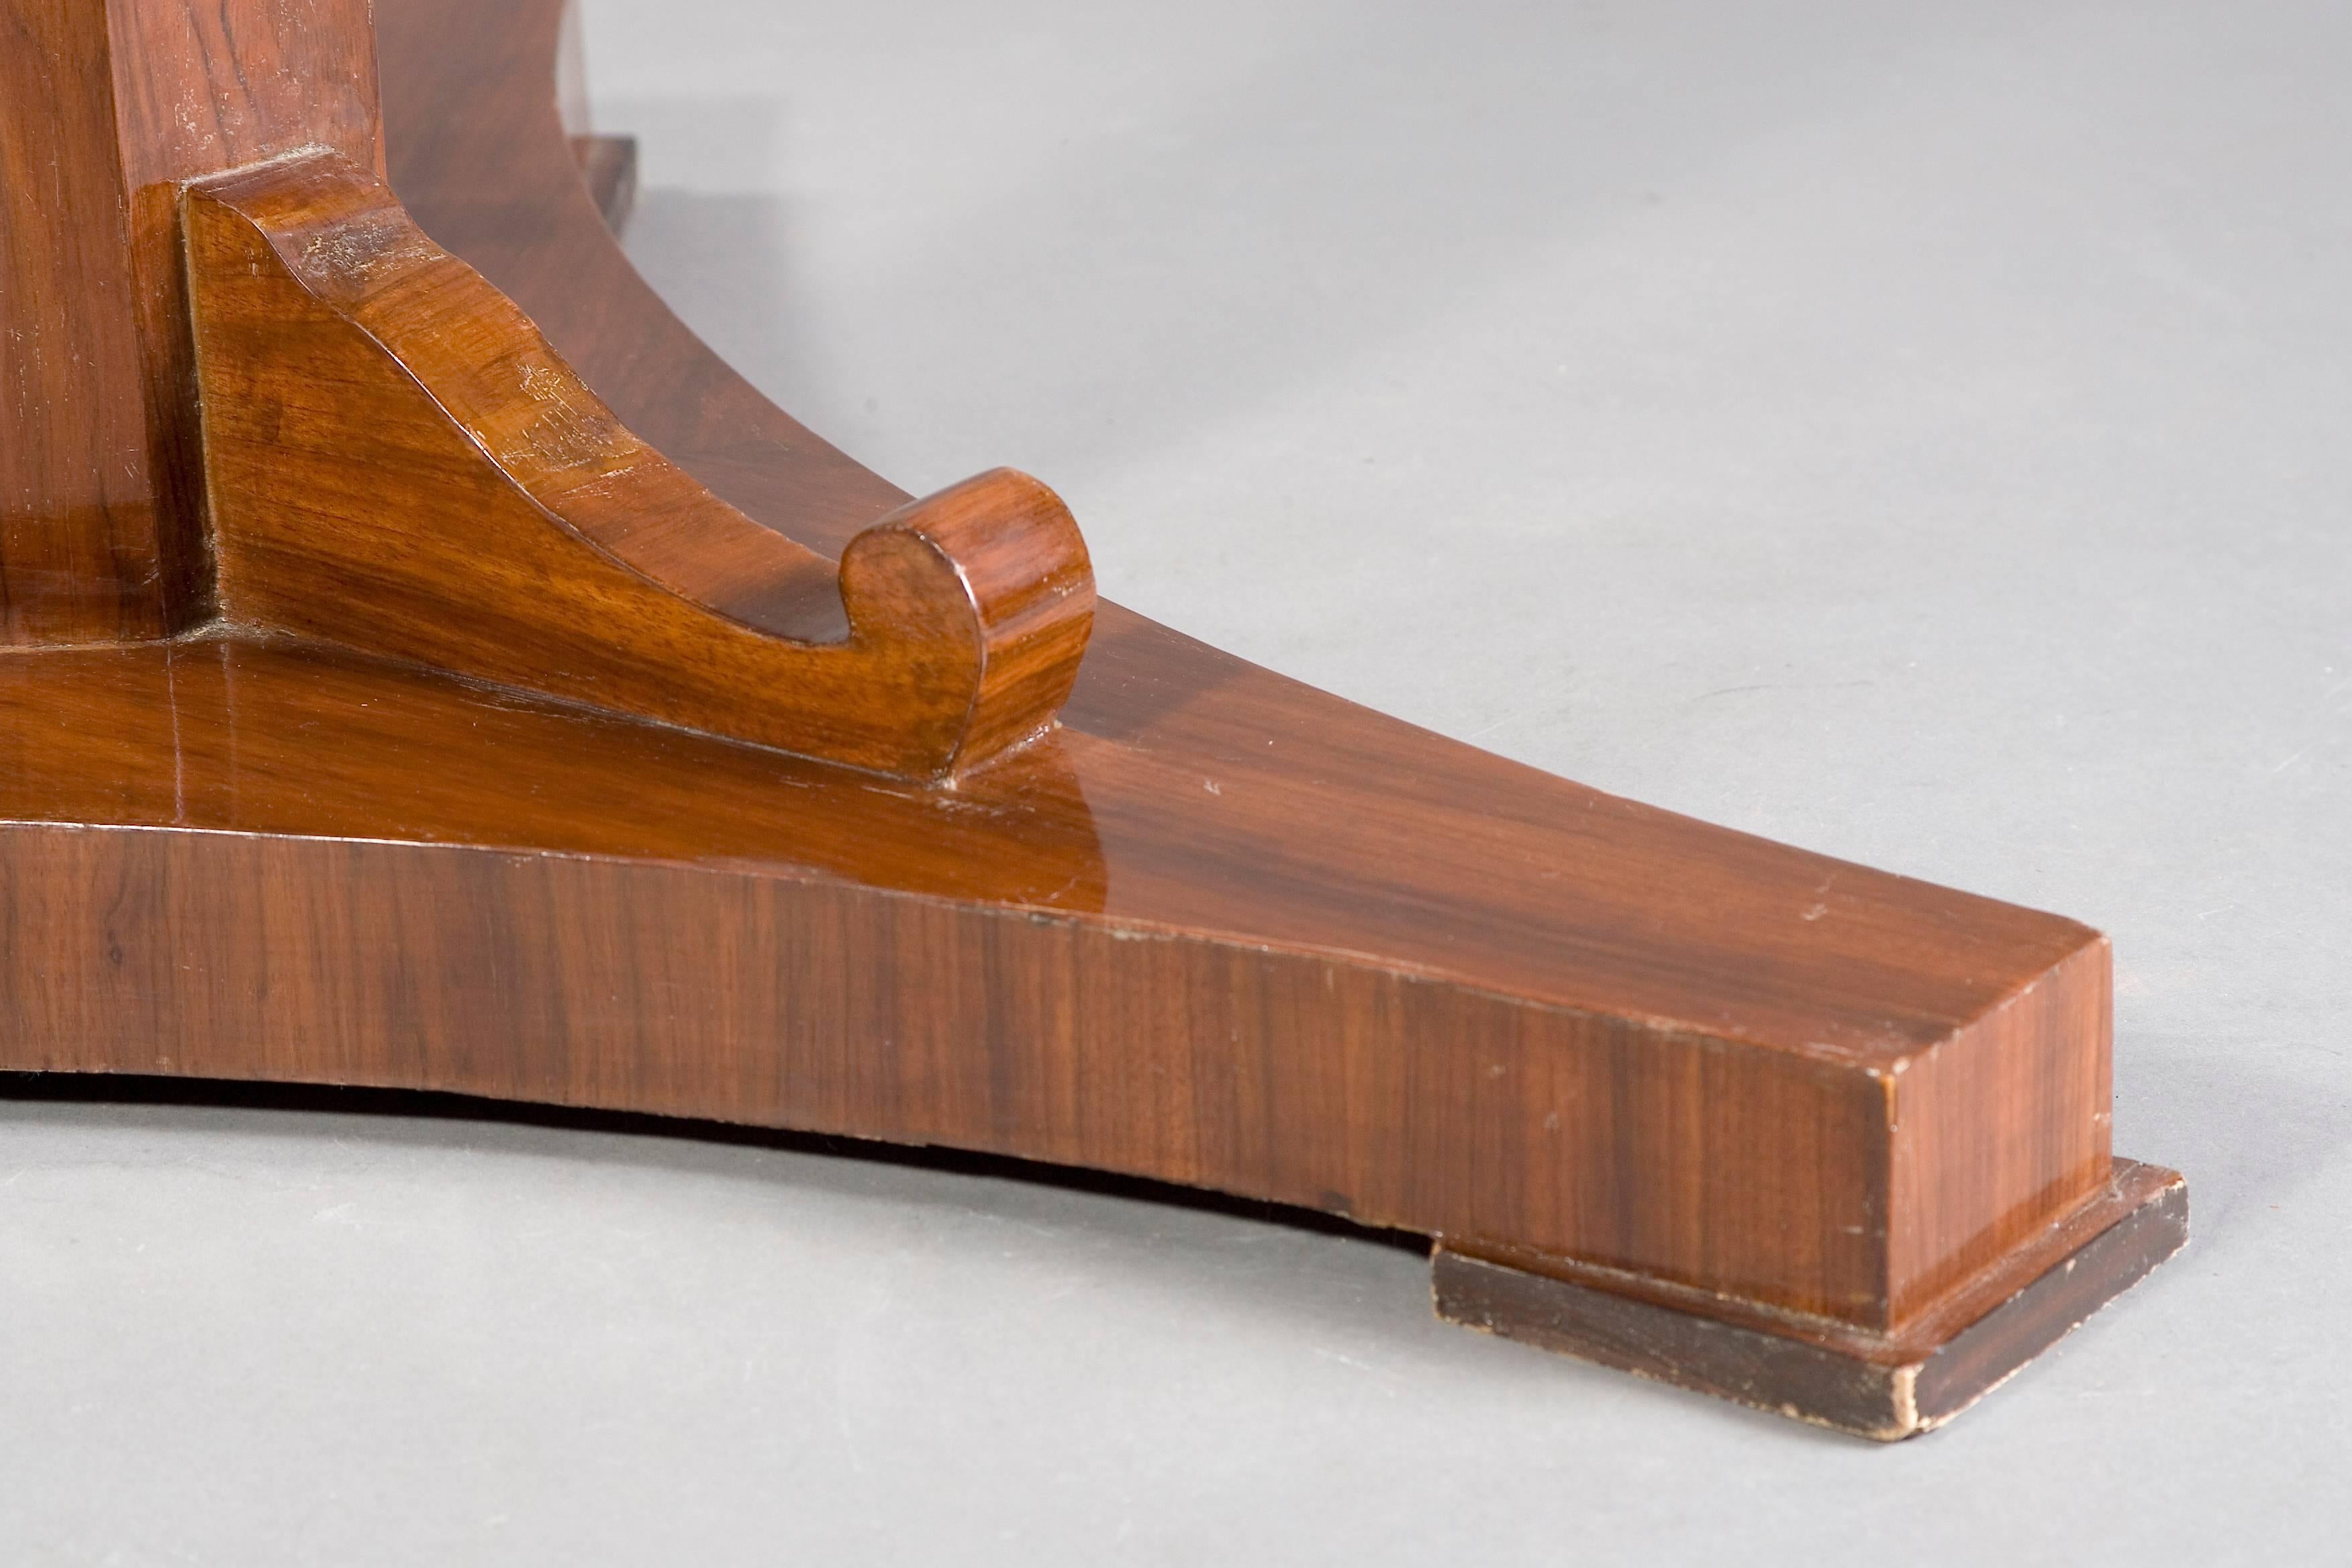 Mahogany on solid wood. Three-sided base plate on glass panes. Centrally ascending, eightfold folded column, flanked by three curved volutes. A strict form of early-Biedermeier time. It is equipped with a folding mechanism. This type is very